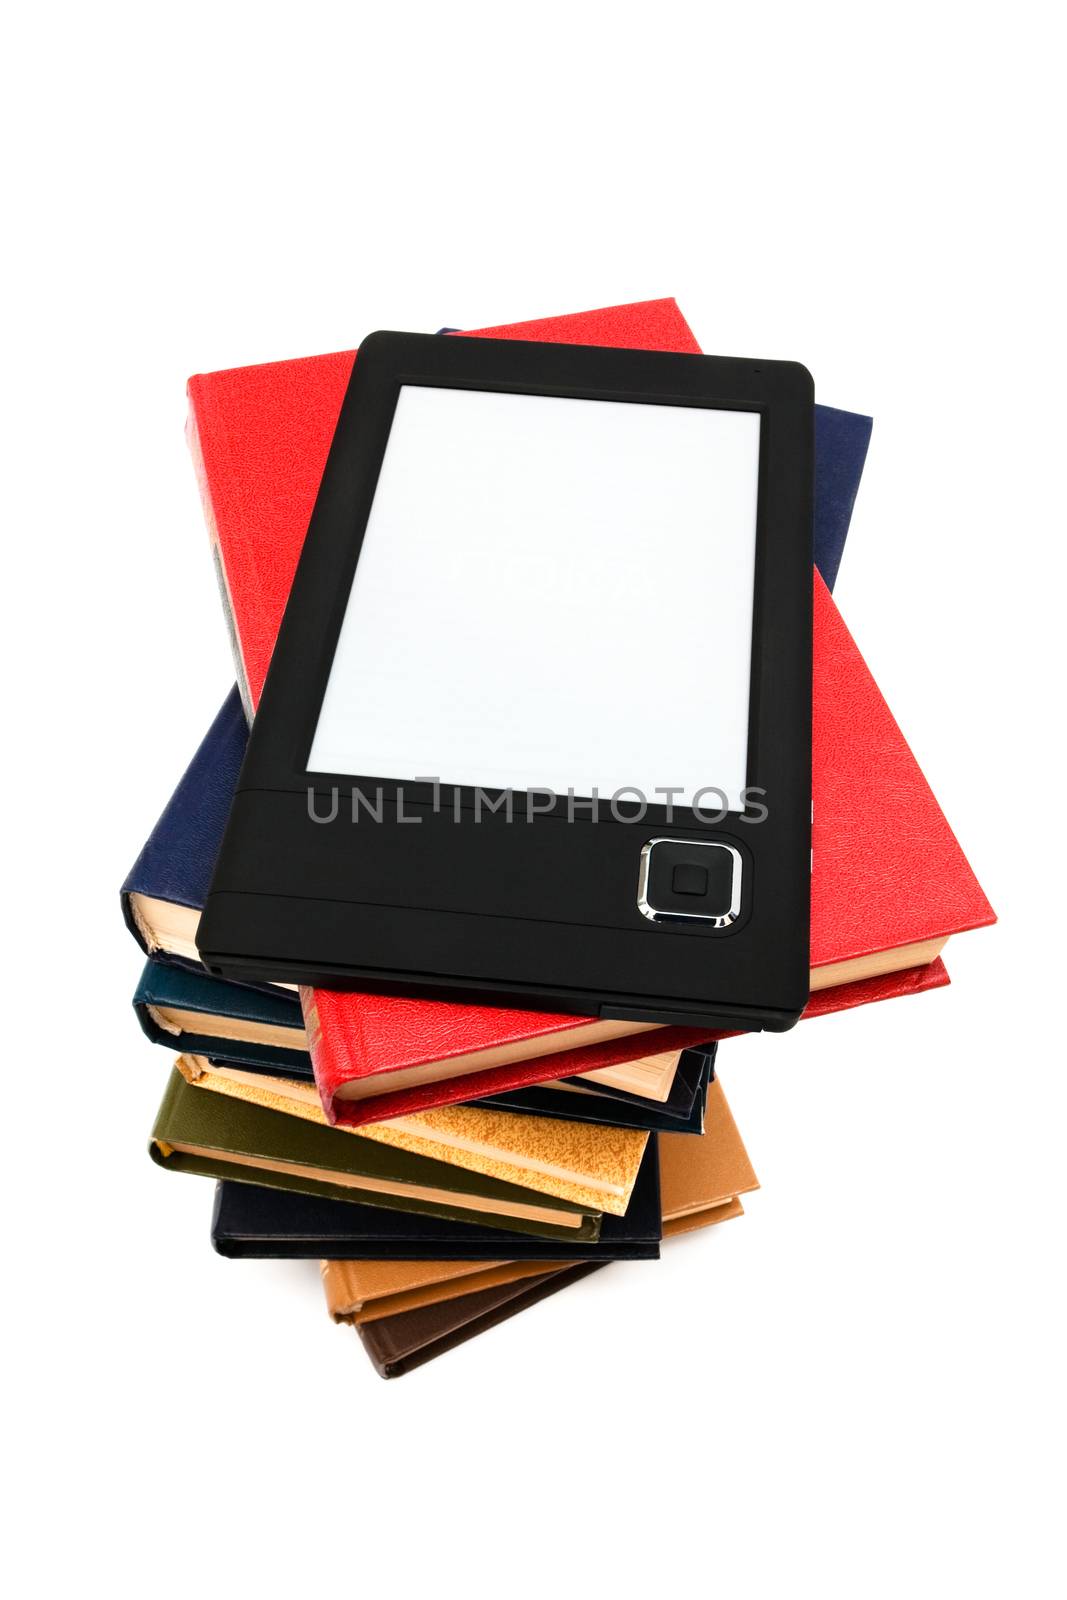 e-book and books by terex